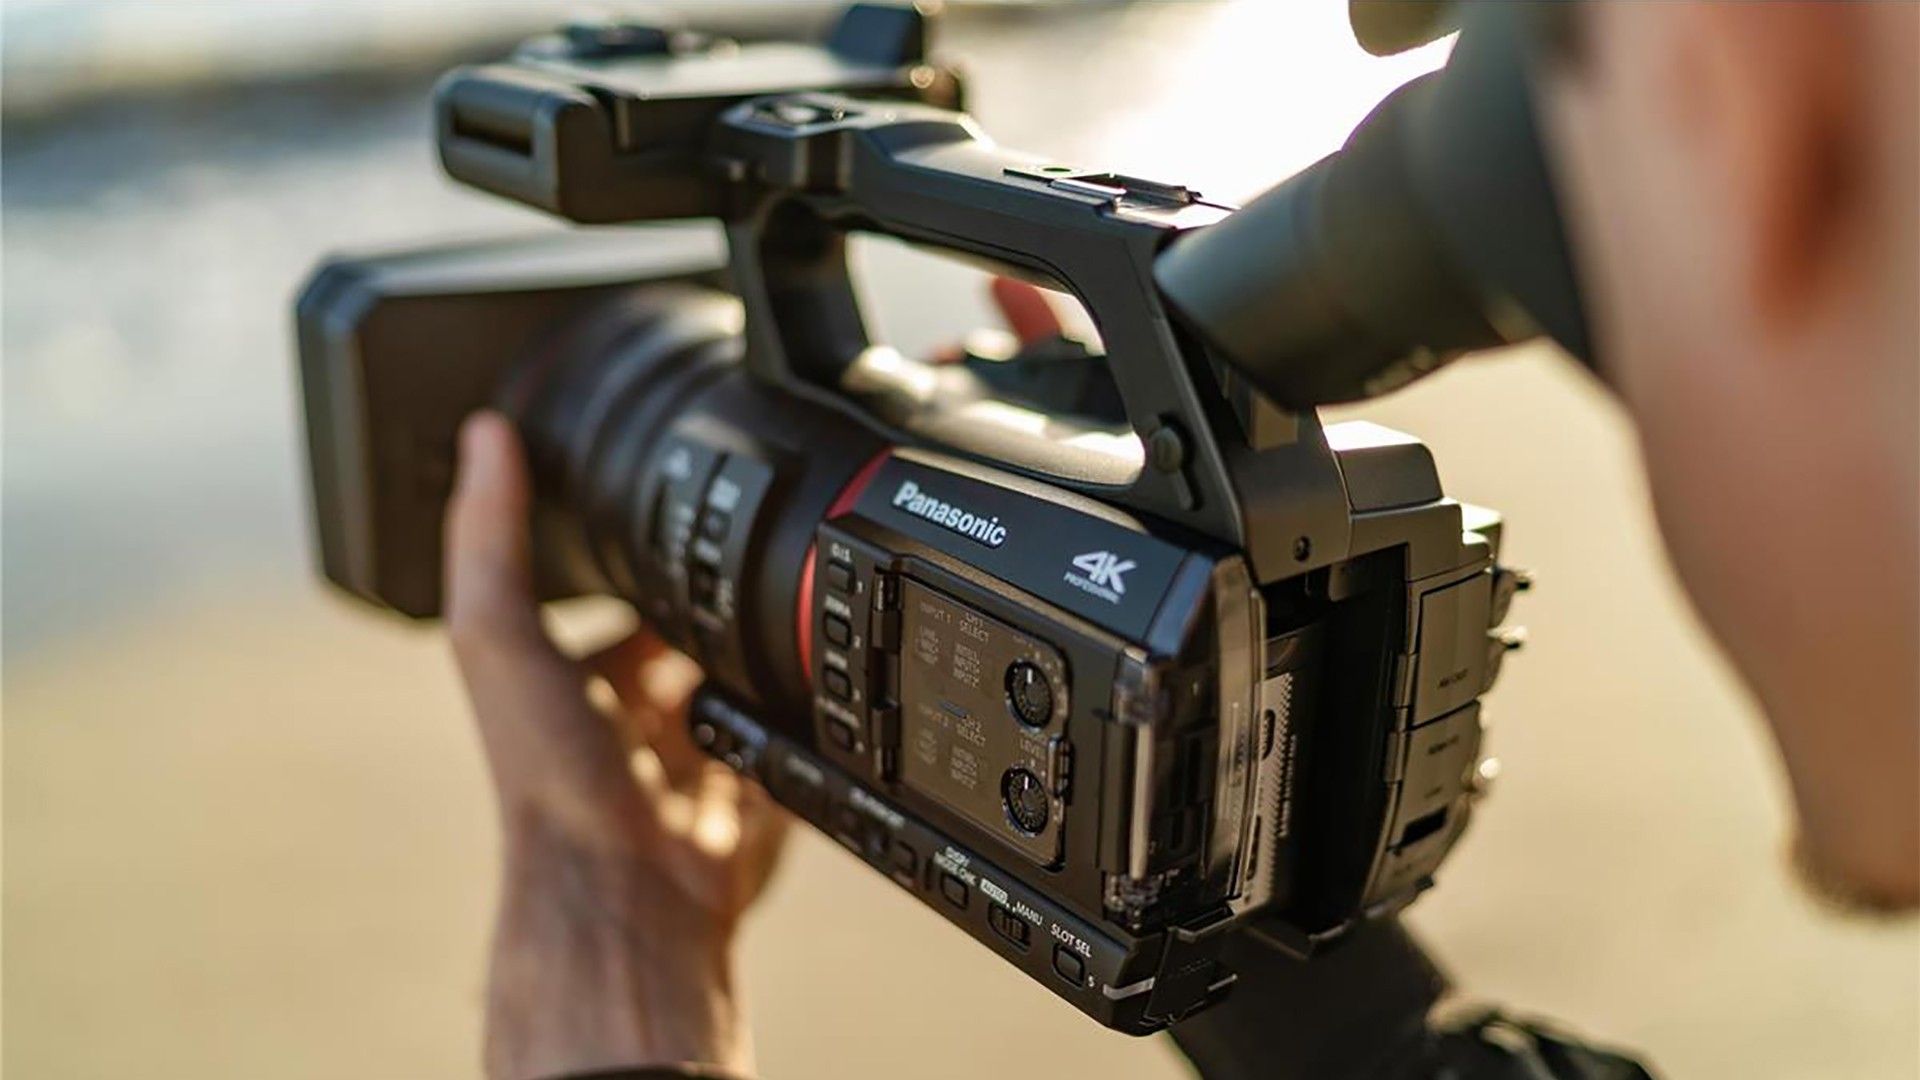 Panasonic Unveils “All-in-One” 4K 10-bit 60fps AG-CX350 Camcorder